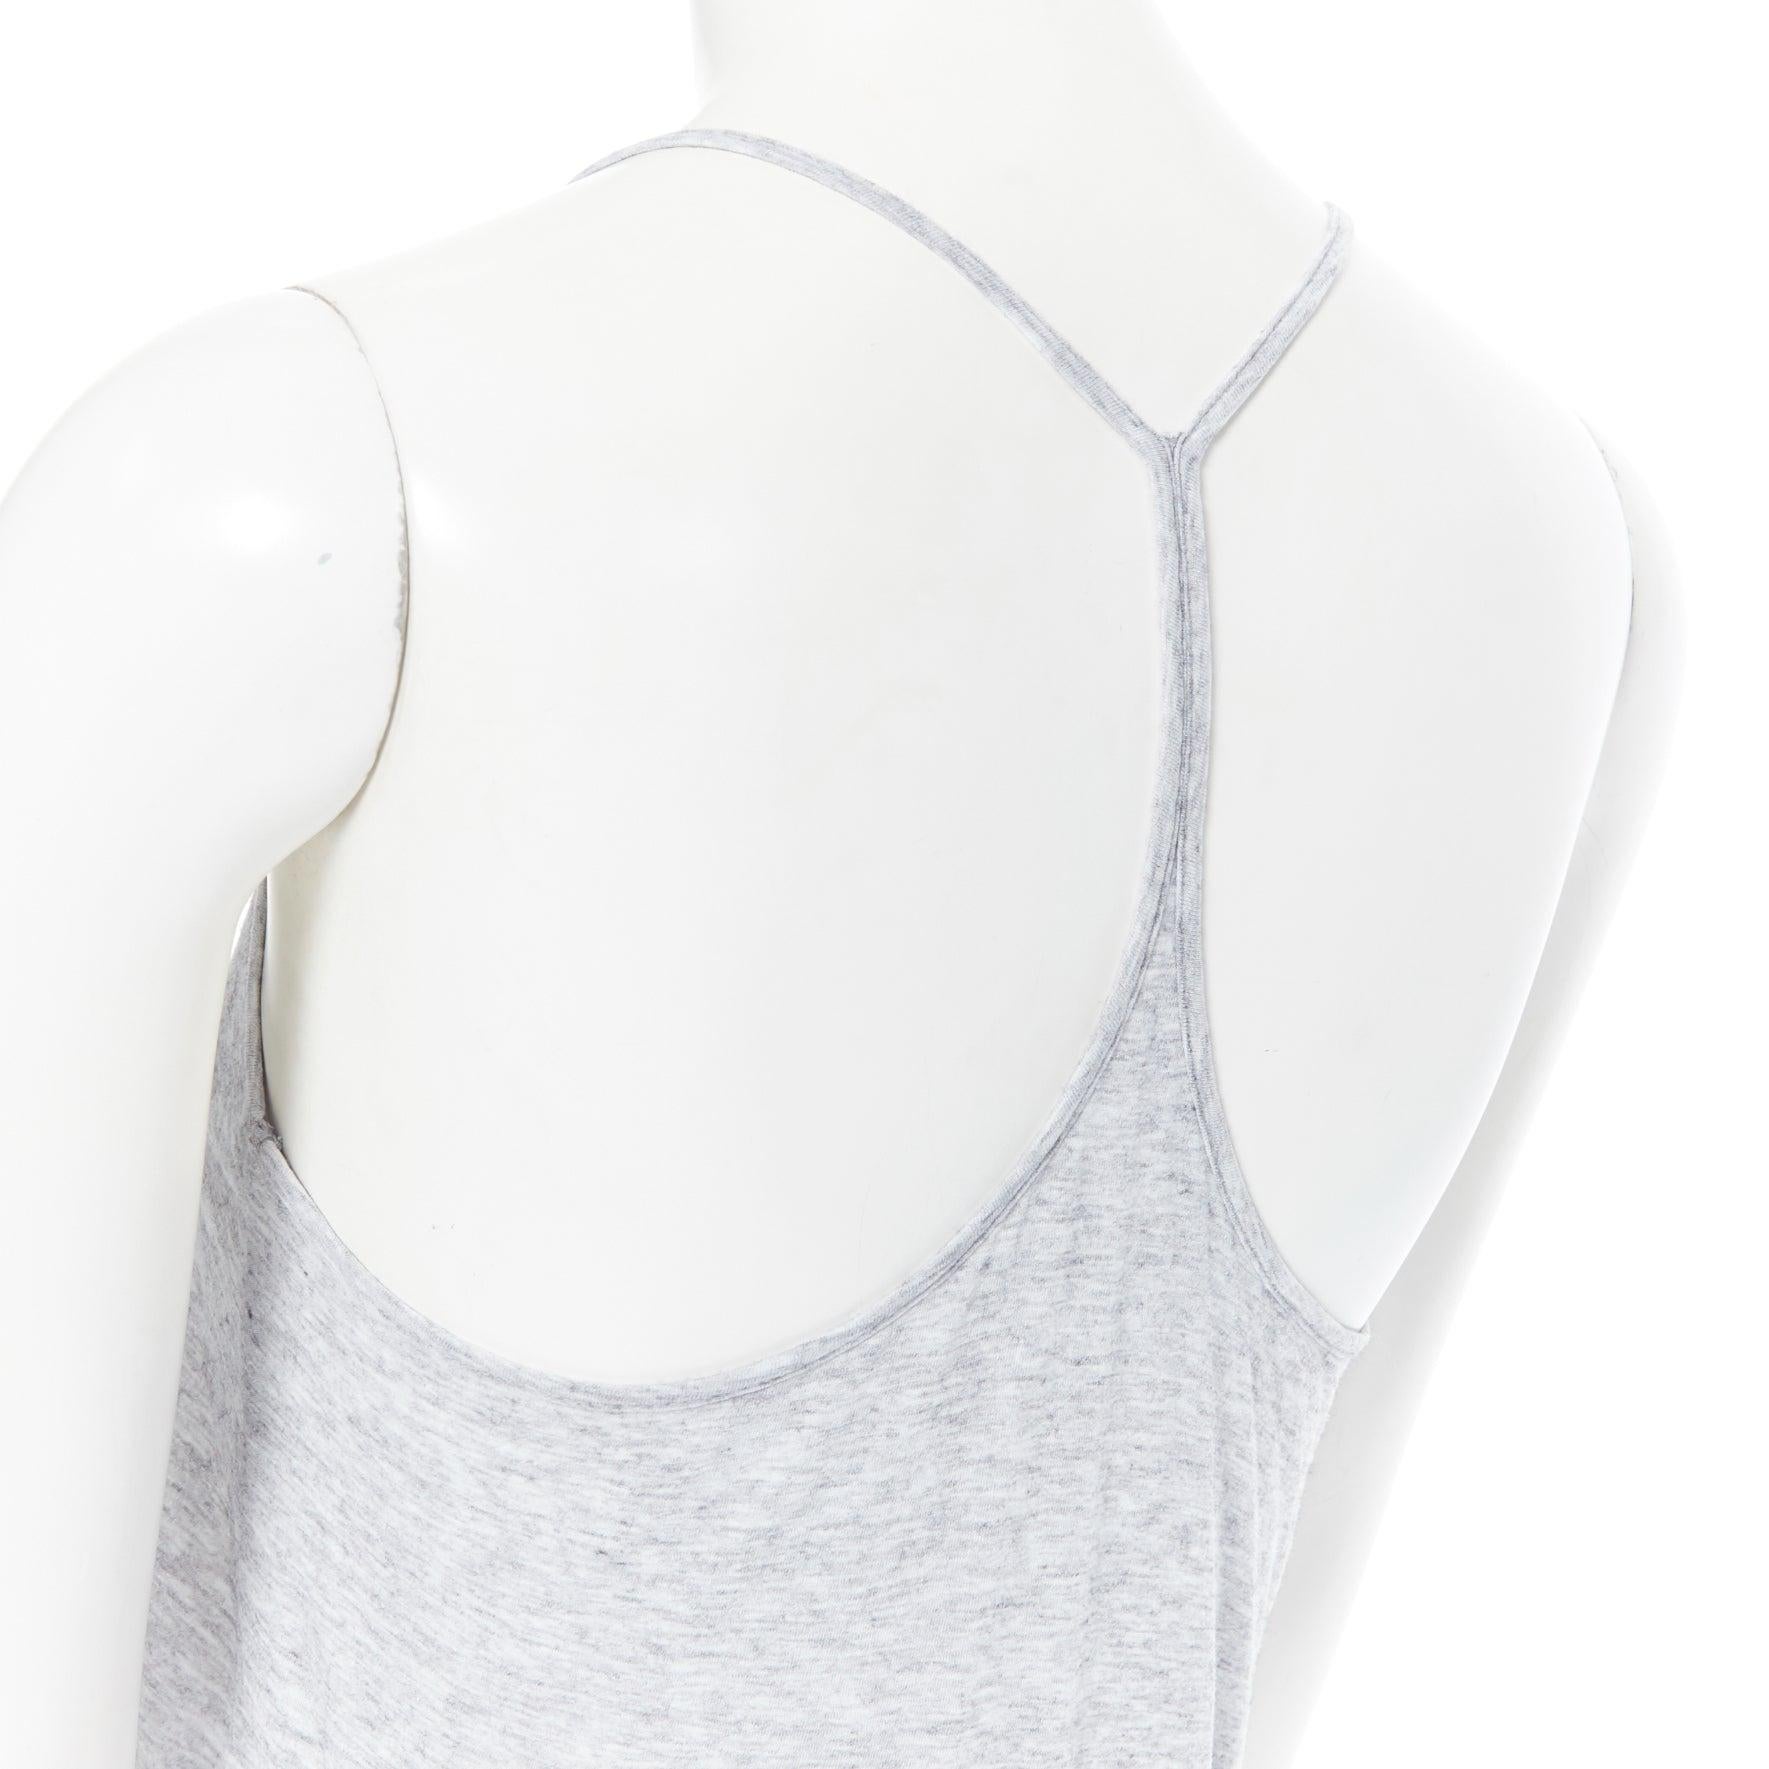 T BY ALEXANDER WANG light grey Tencel wool cashmere blend T-strap tank XS
Reference: LNKO/A01365
Brand: Alexander Wang T
Designer: Alexander Wang
Model: Tank top
Material: Others
Color: Grey
Pattern: Solid
Made in: China

CONDITION:
Condition: